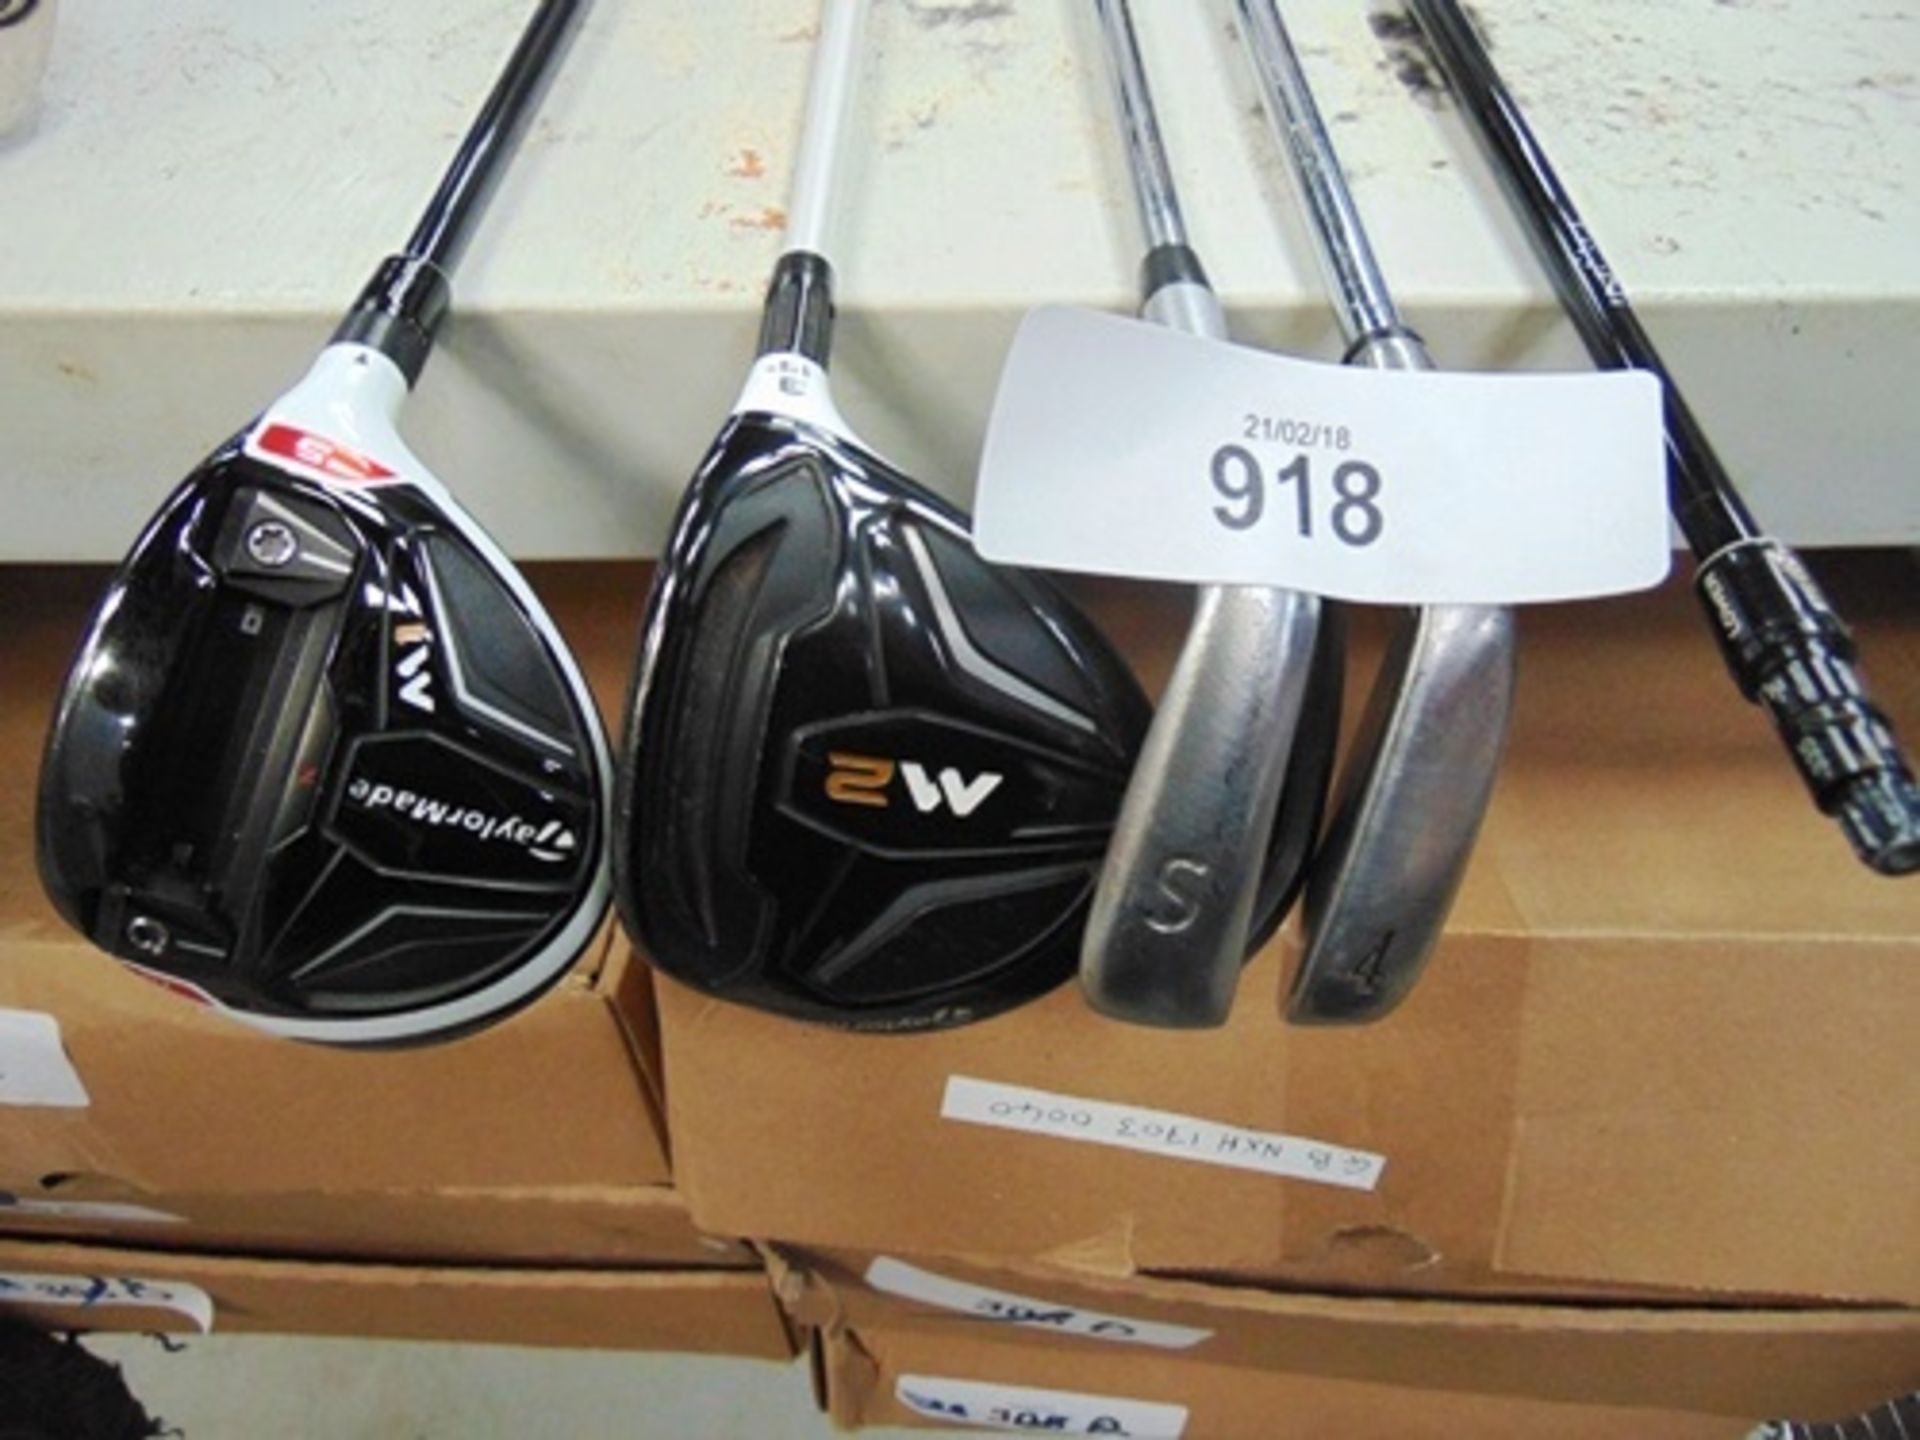 1 x Taylormade M2 No. 3 club, 1 x Taylormade M1 No. 5 club, 1 x Ping 120 sand wedge, 1 x Callaway - Image 3 of 3